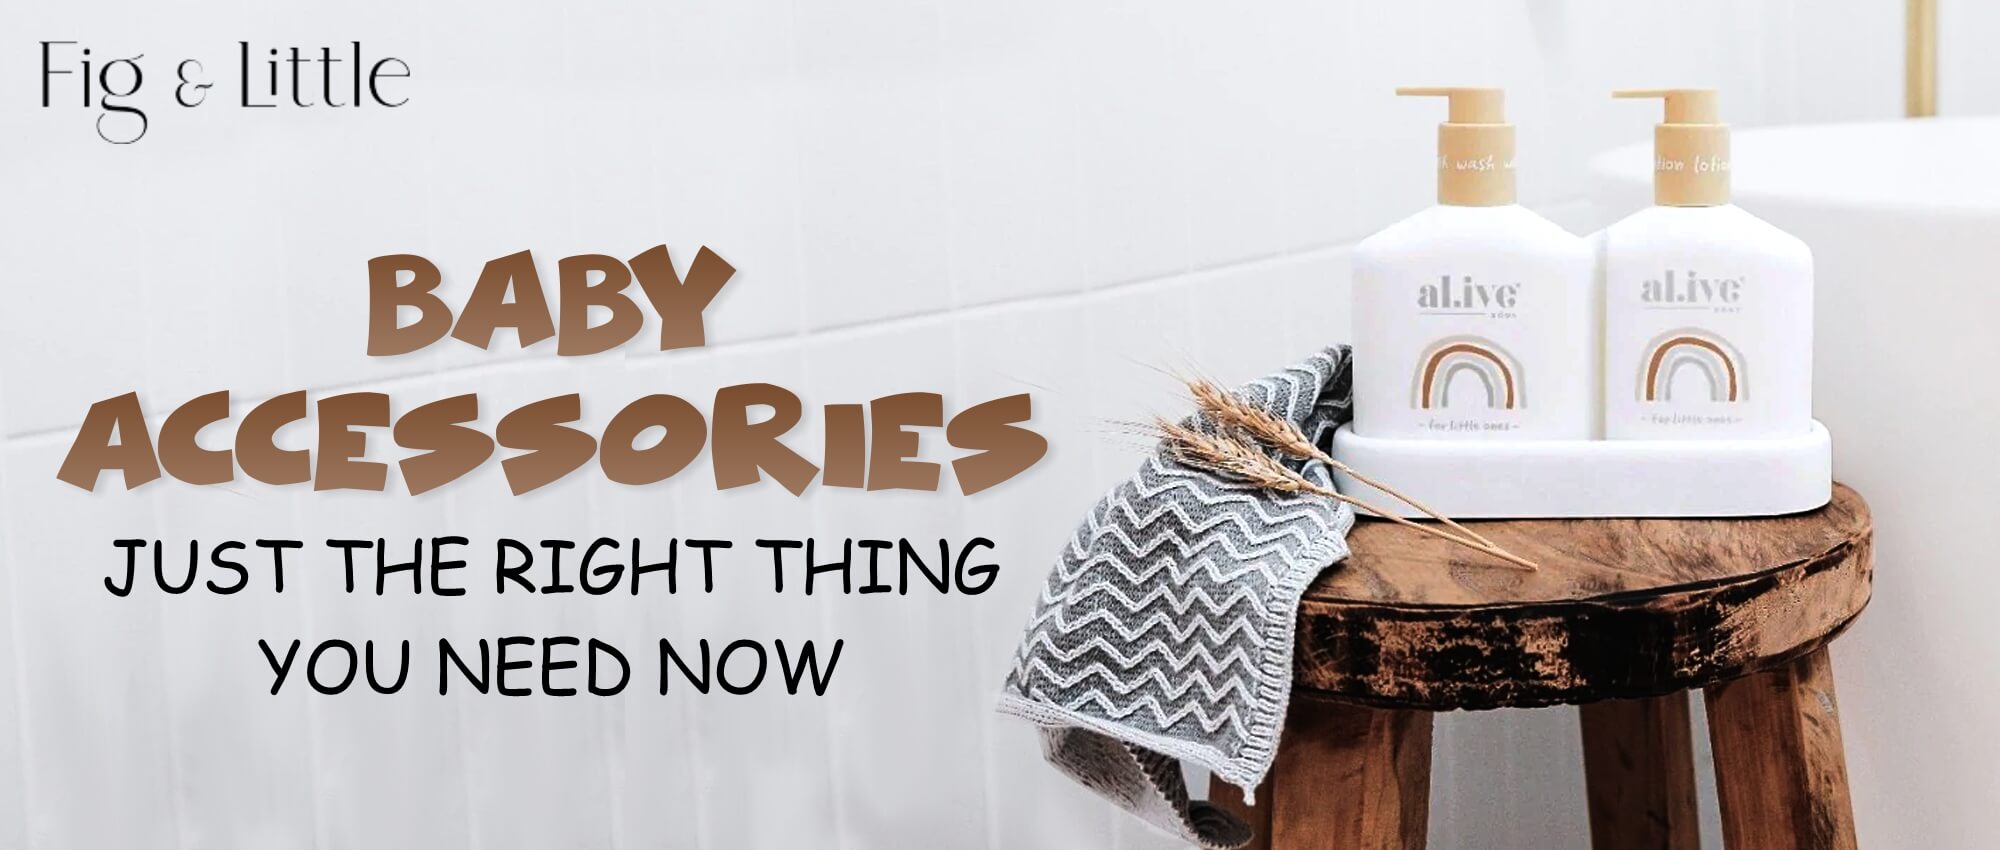 BABY ACCESSORIES JUST THE RIGHT THING YOU NEED NOW